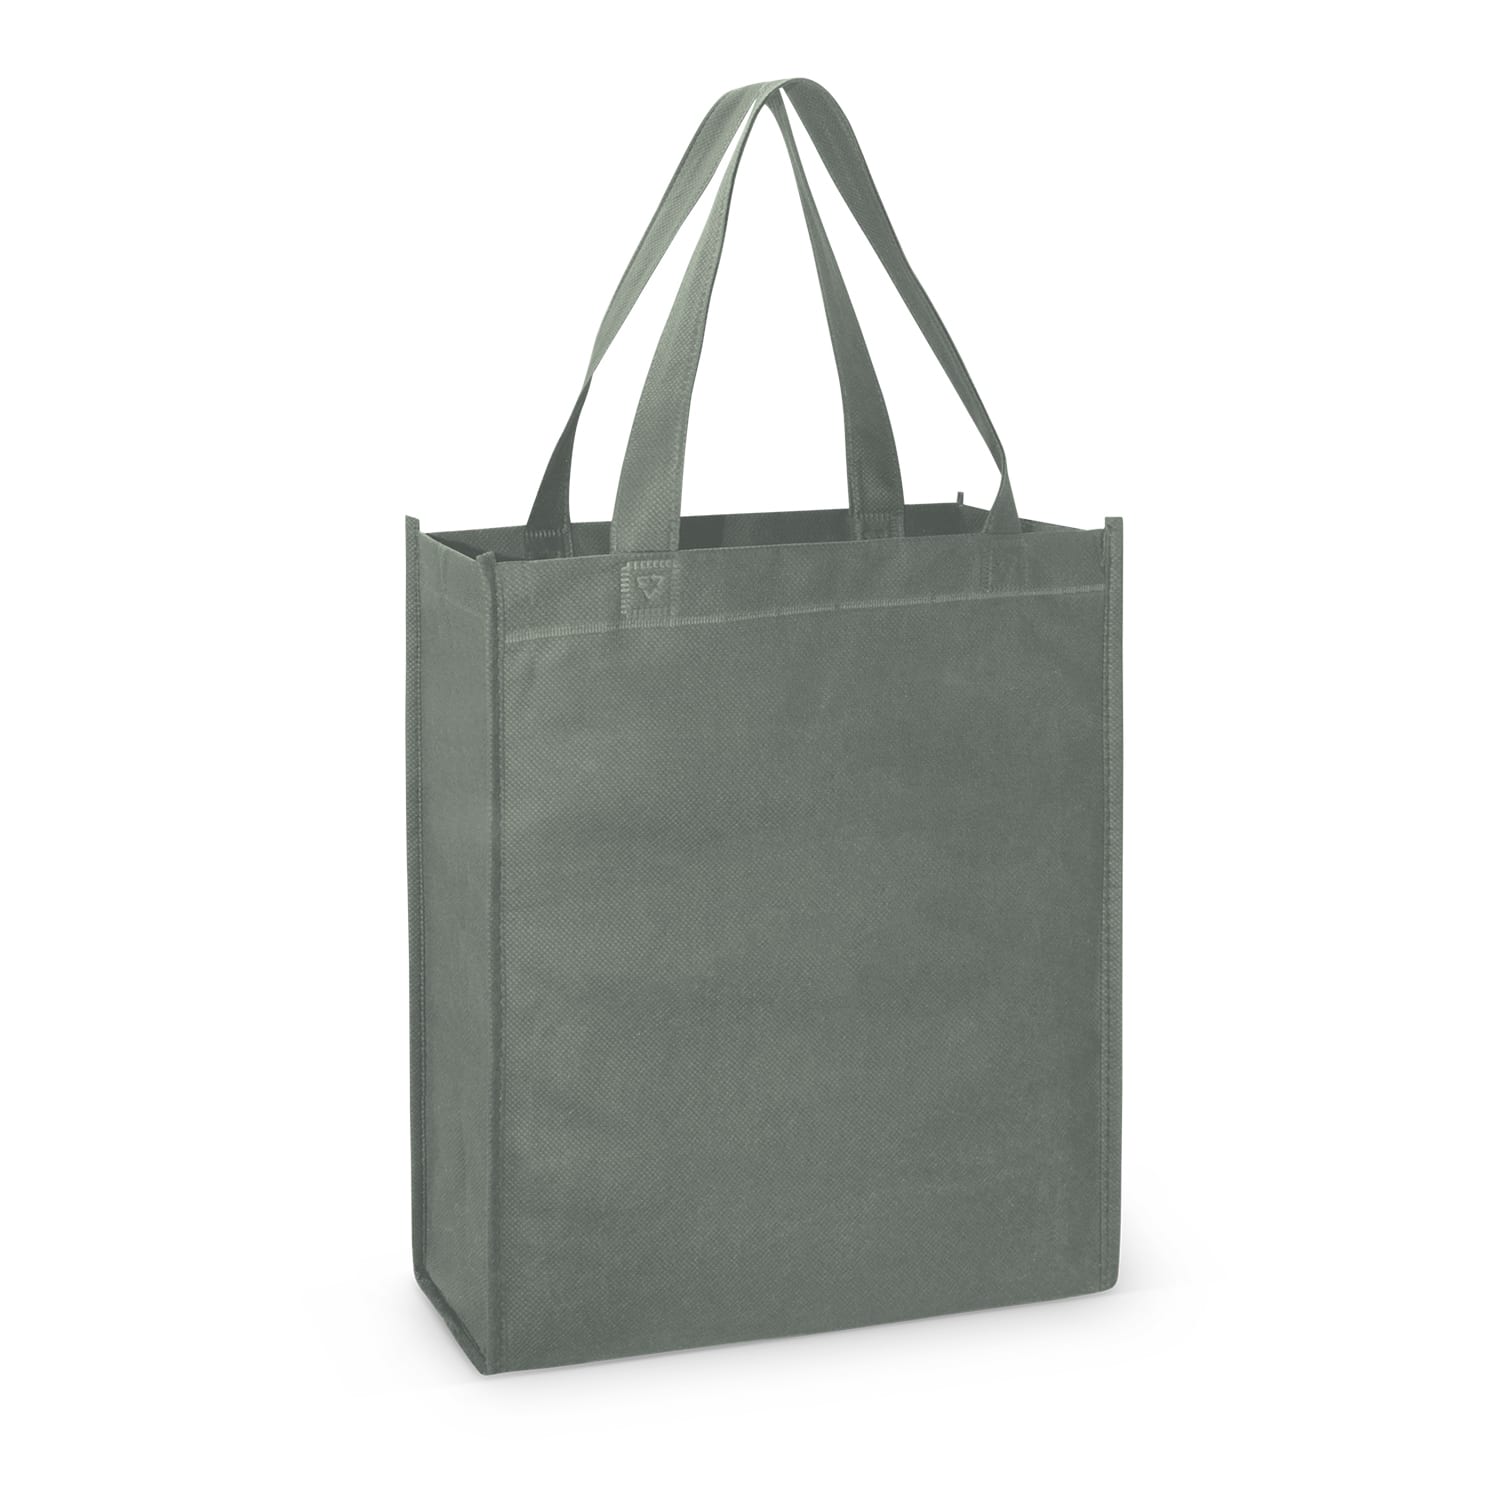 Conference Kira A4 Tote Bag a4